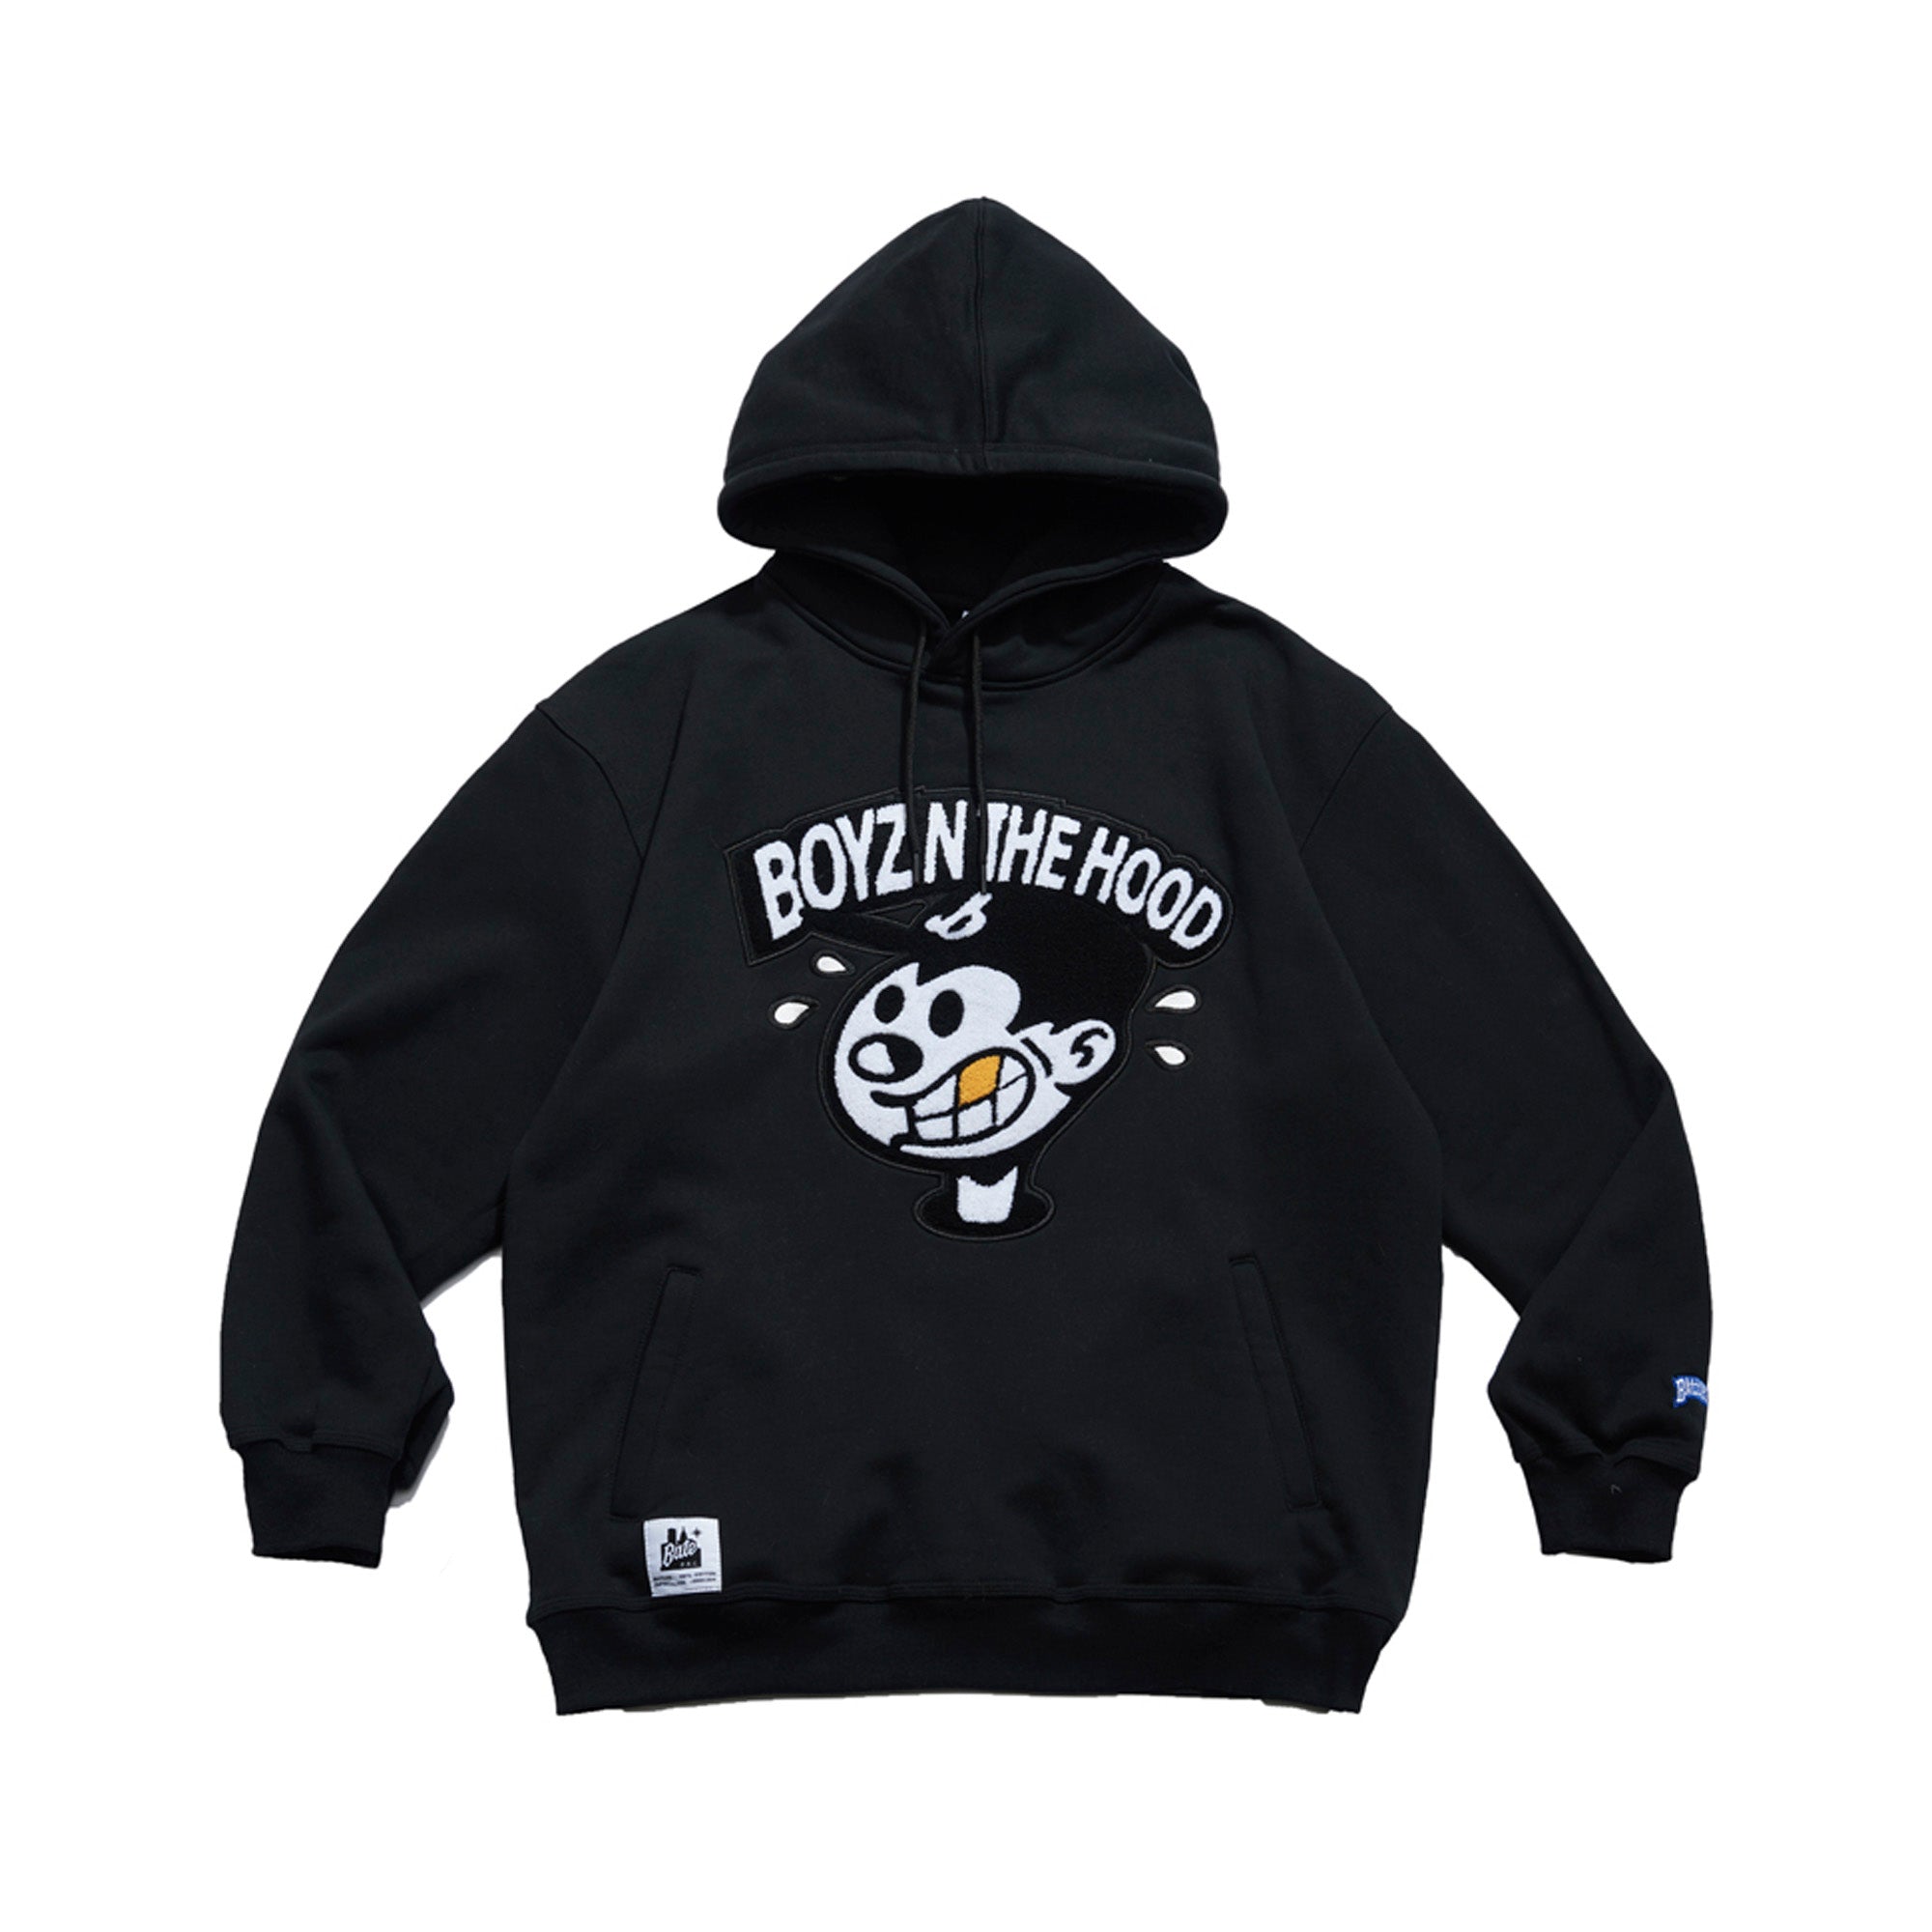 Patch Embroidery Heavyweight hoodie